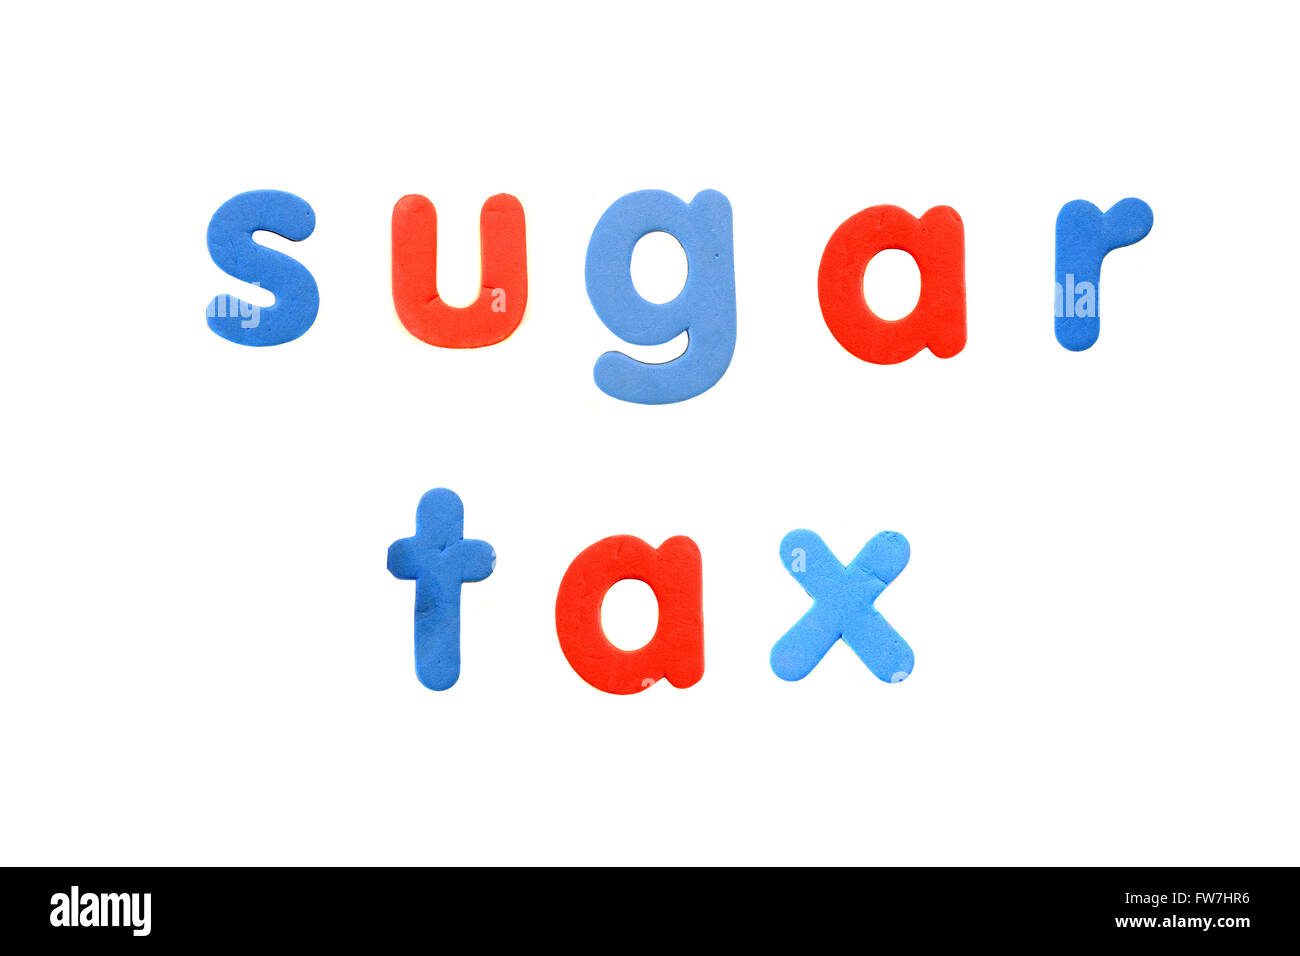 The words Sugar Tax created from magnetic fridge alphabet pieces photographed against a white background. Stock Photo